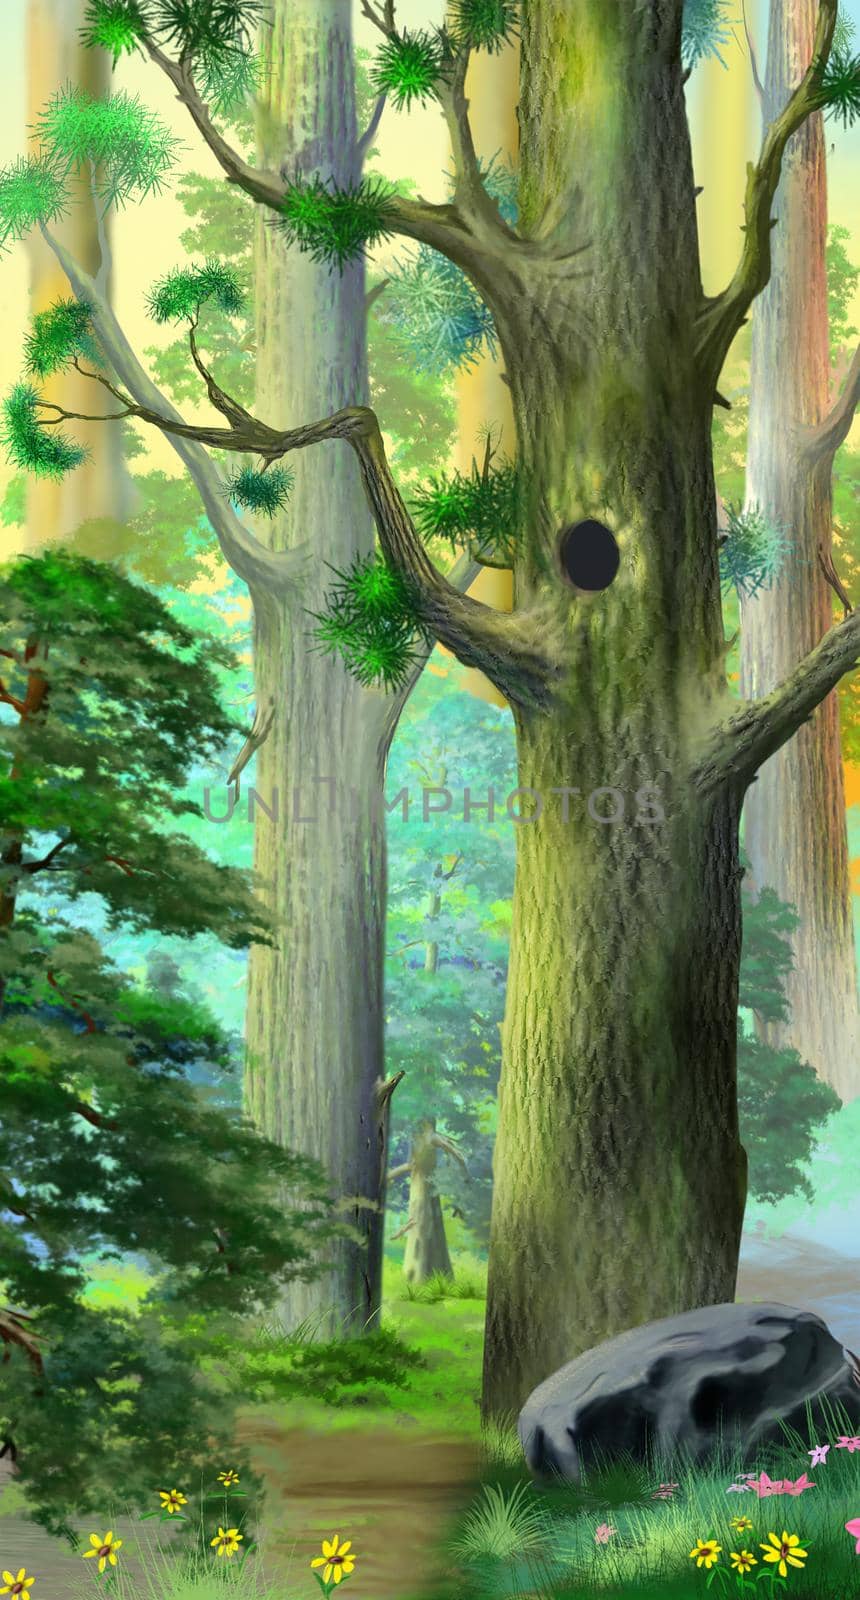 Hollow in a large pine tree in the taiga on a summer day. Digital Painting Background, Illustration.